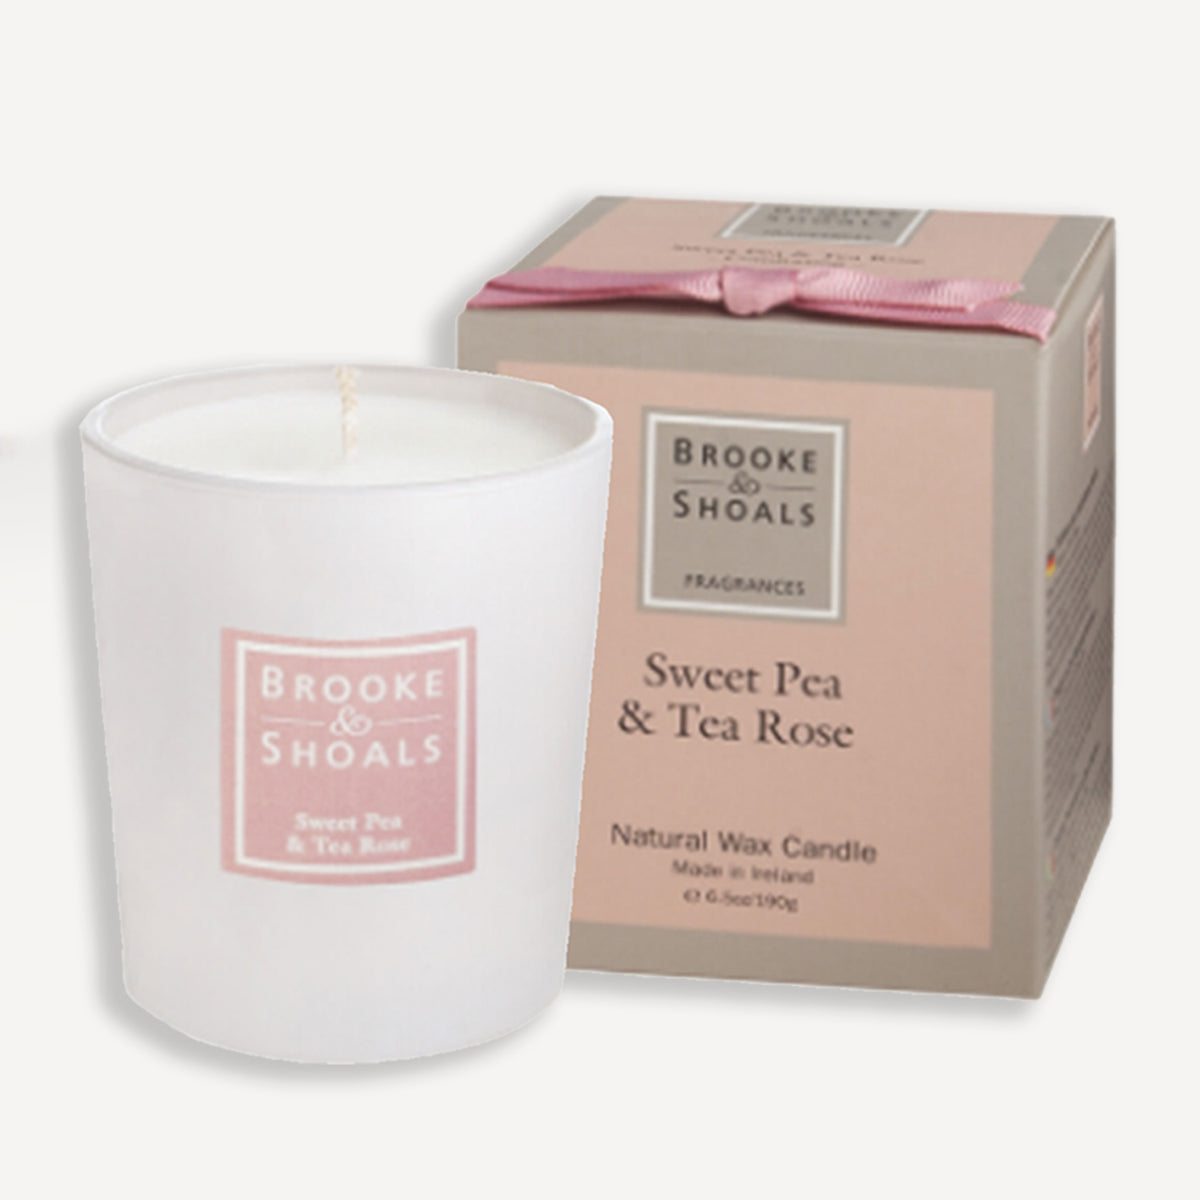 Avenue Montaigne Gift Set with Brooke &amp; Shoals Sweet Pea and Tea Rose Candle